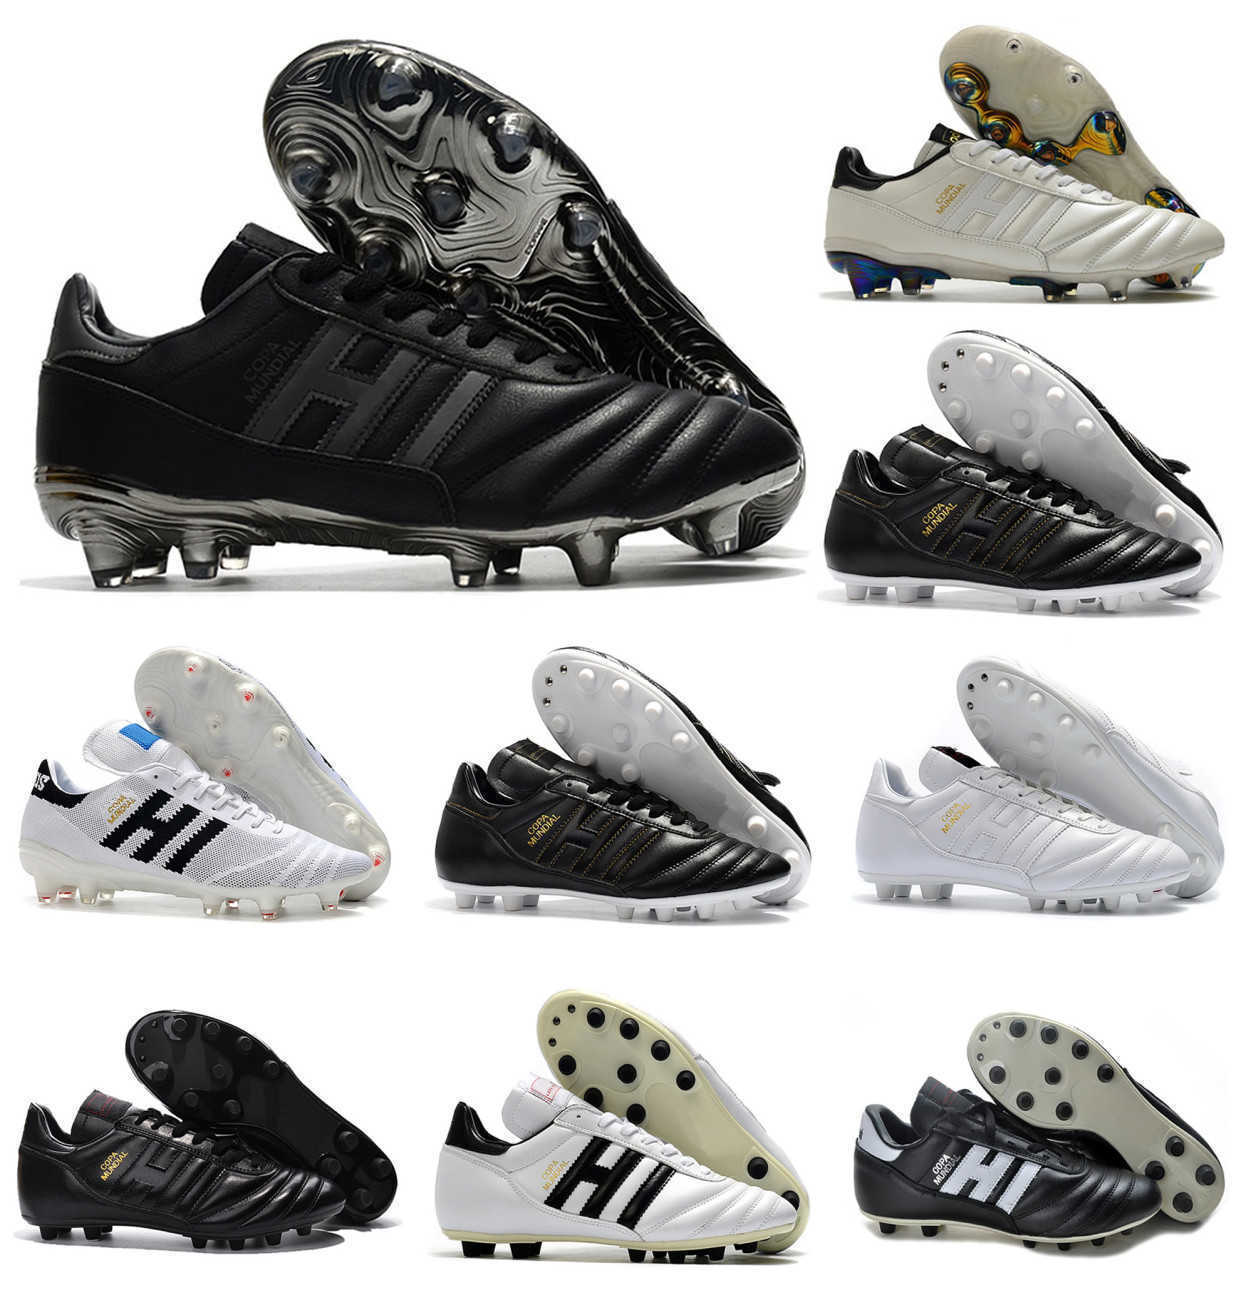 

Designer Boots For Teens Classics Mens Soccer Copa Mundial 21 70Y Eternal Class FG Leather Football boot futbol Cleats Size 39-45 Shoes, 4 copa 70y fg